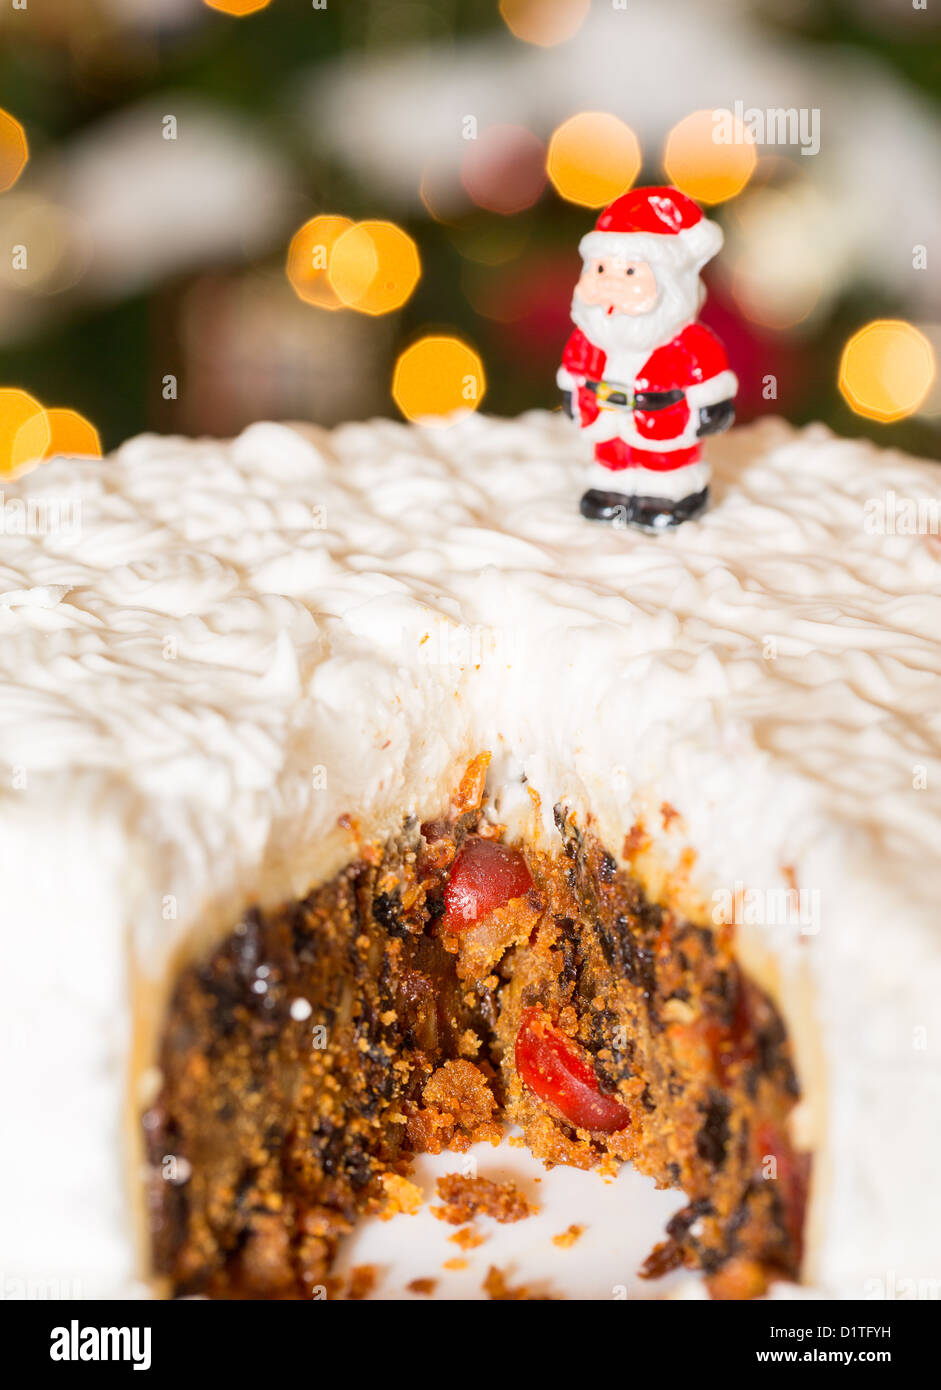 Slice out of iced Christmas cake with lights of xmas tree out of focus in background Stock Photo